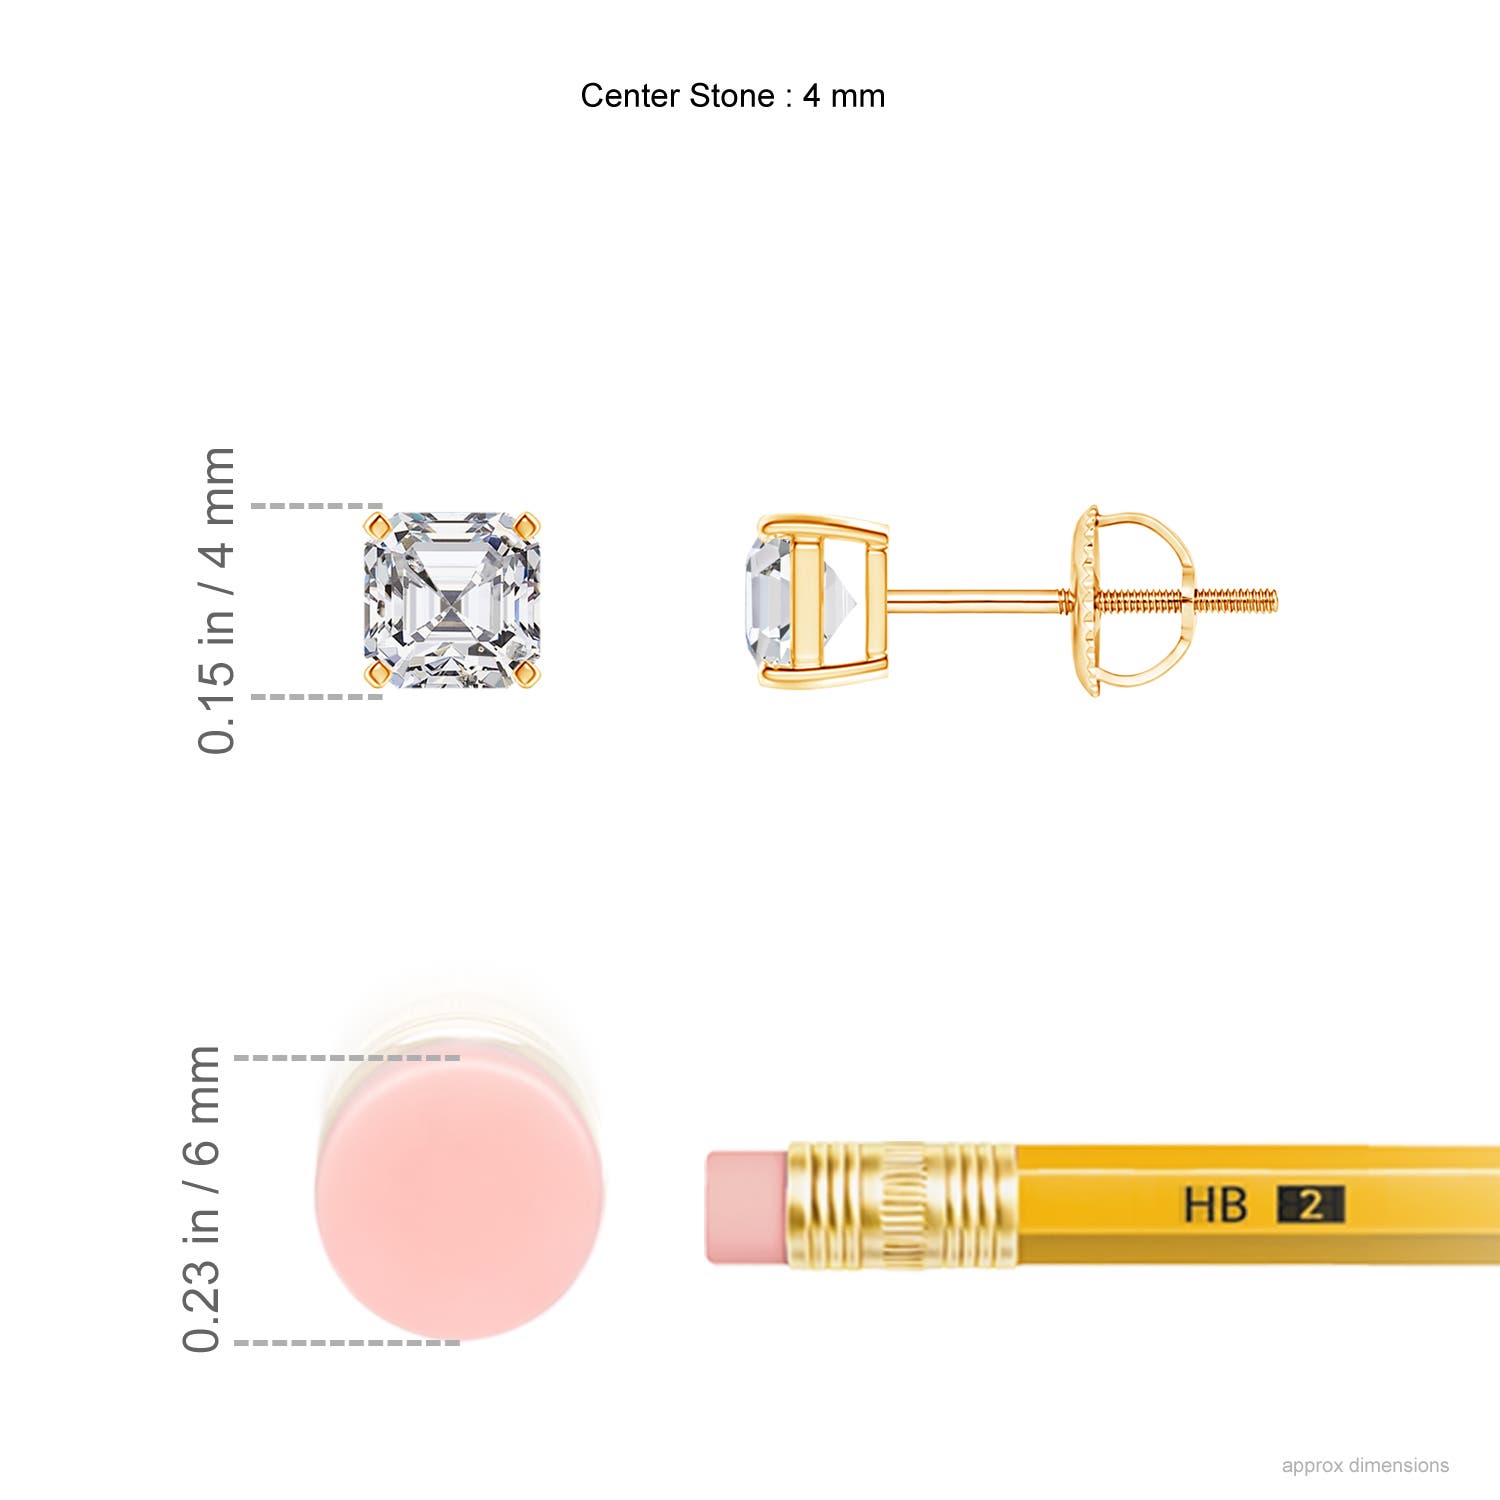 H, SI2 / 0.72 CT / 14 KT Yellow Gold